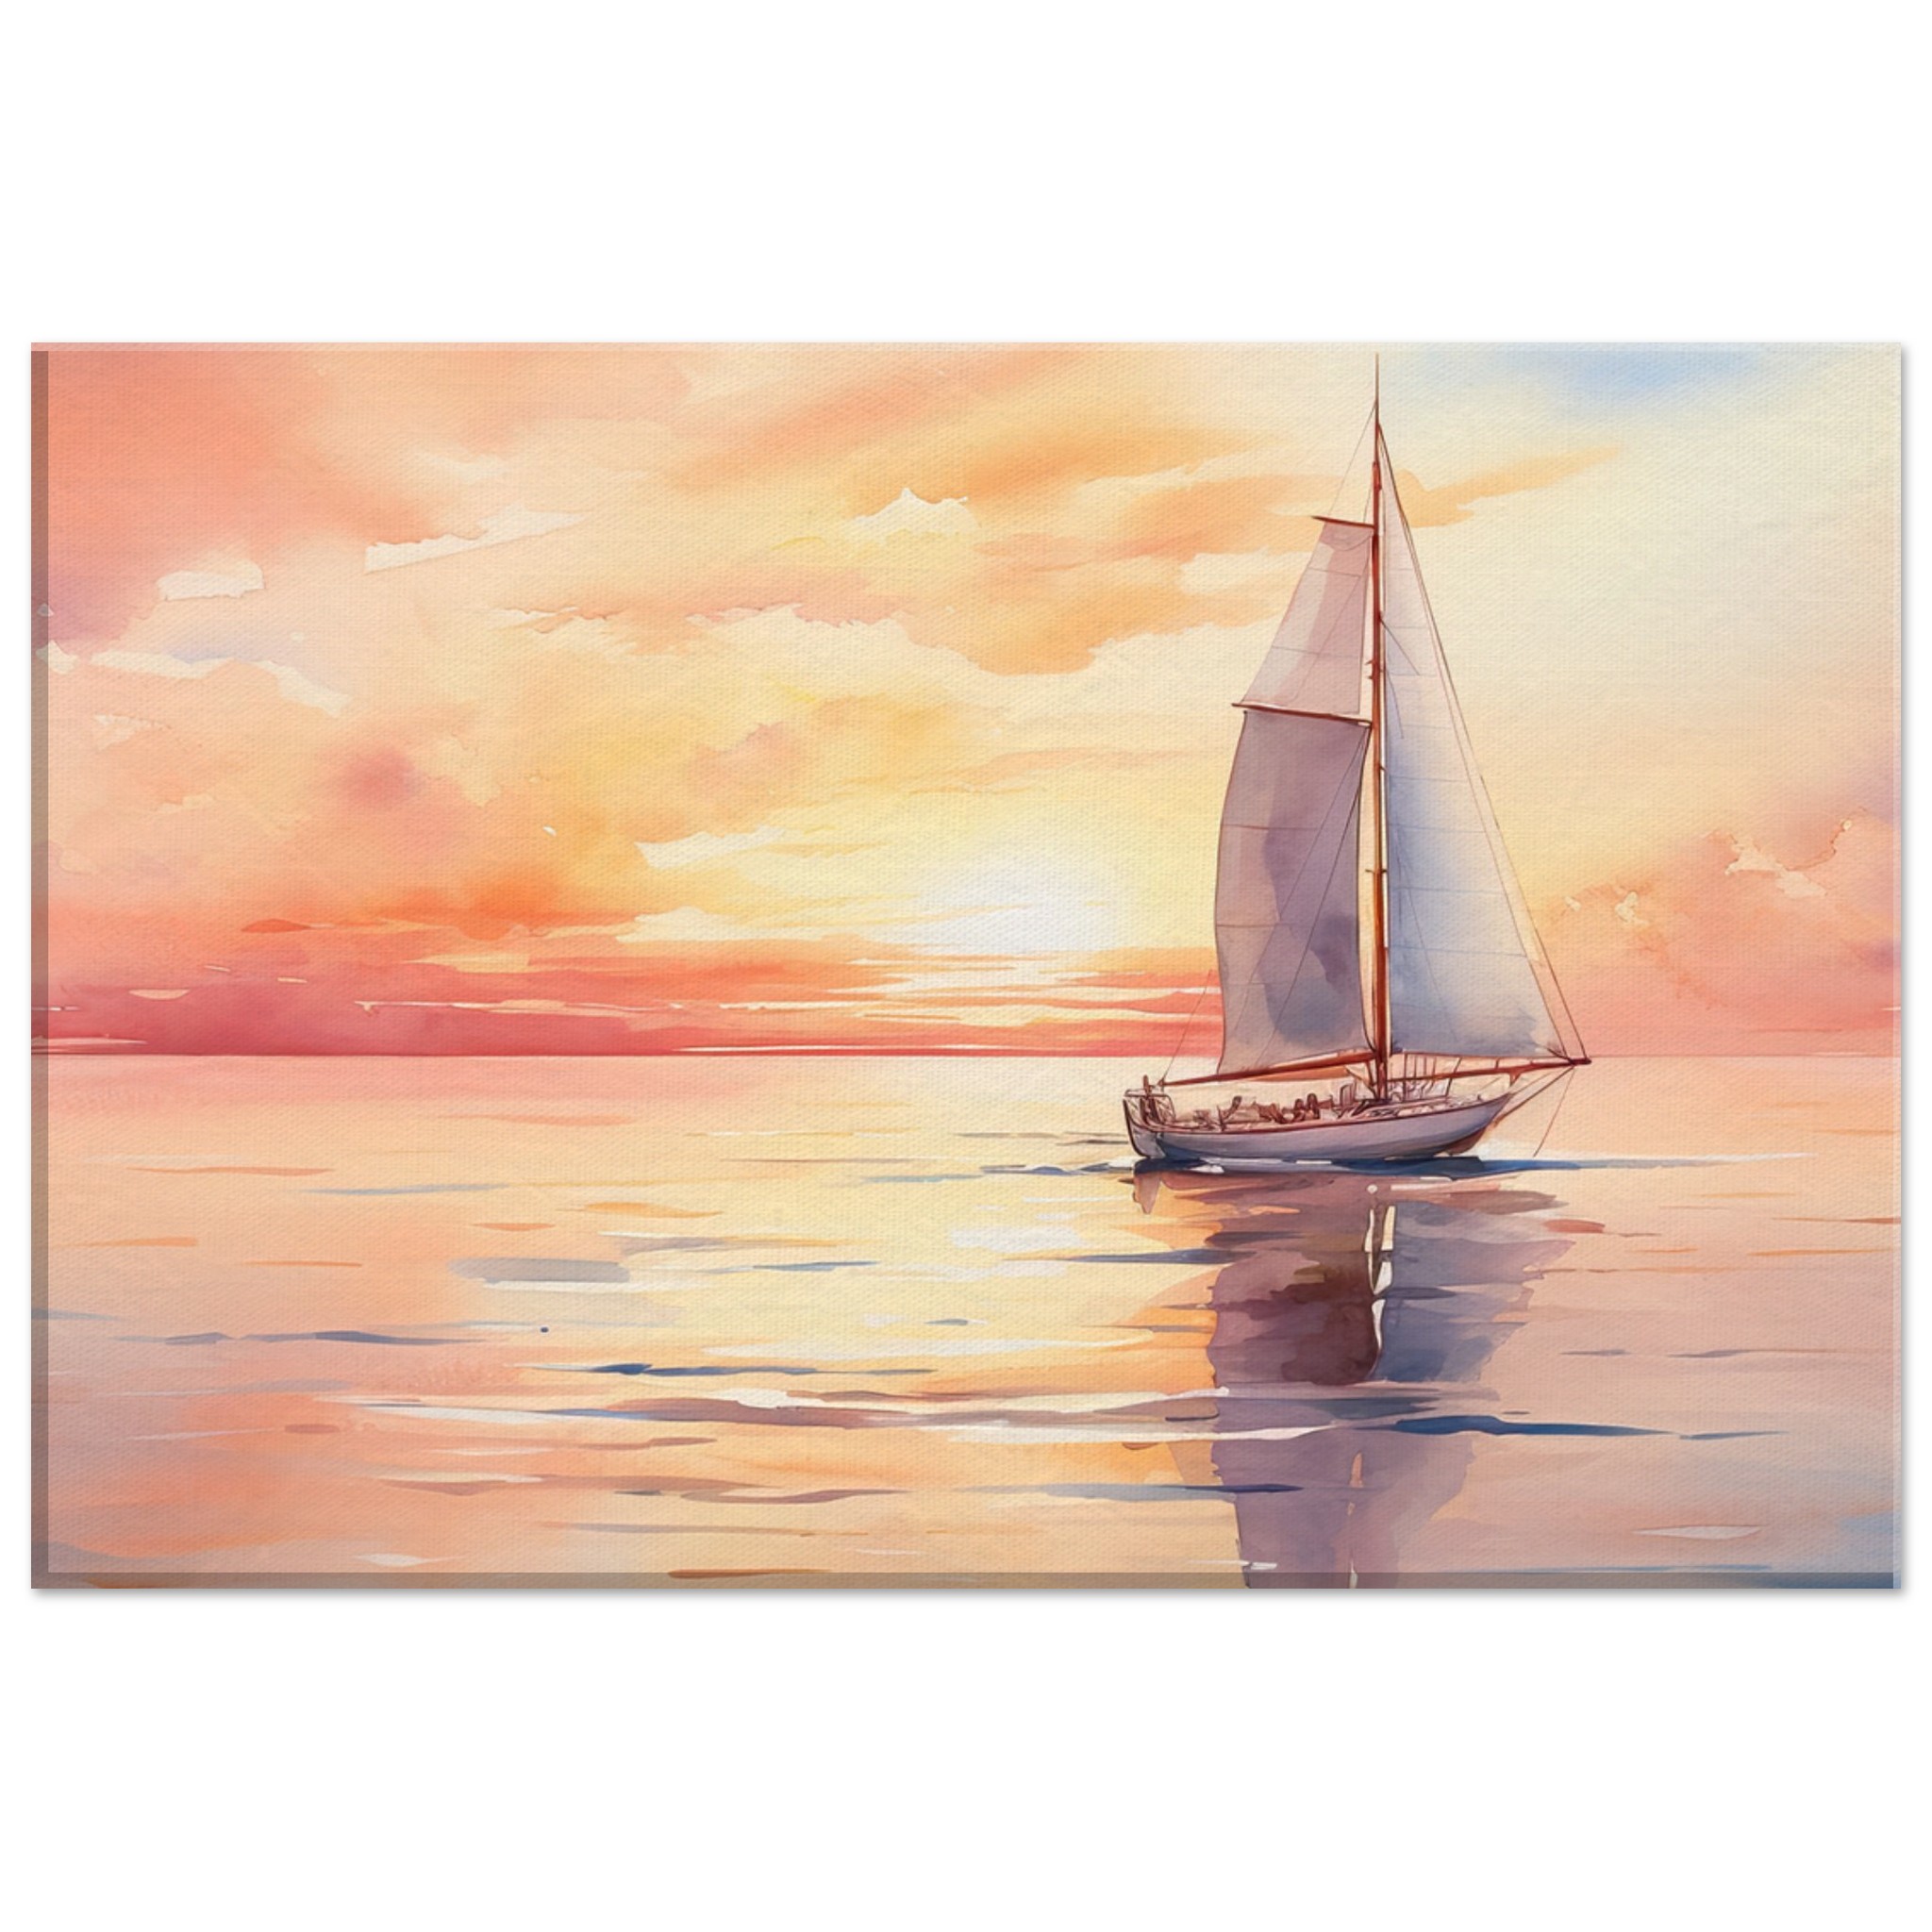 Beautiful Watercolor Sunset Sailboat Canvas Print – 30×45 cm / 12×18″, Thick